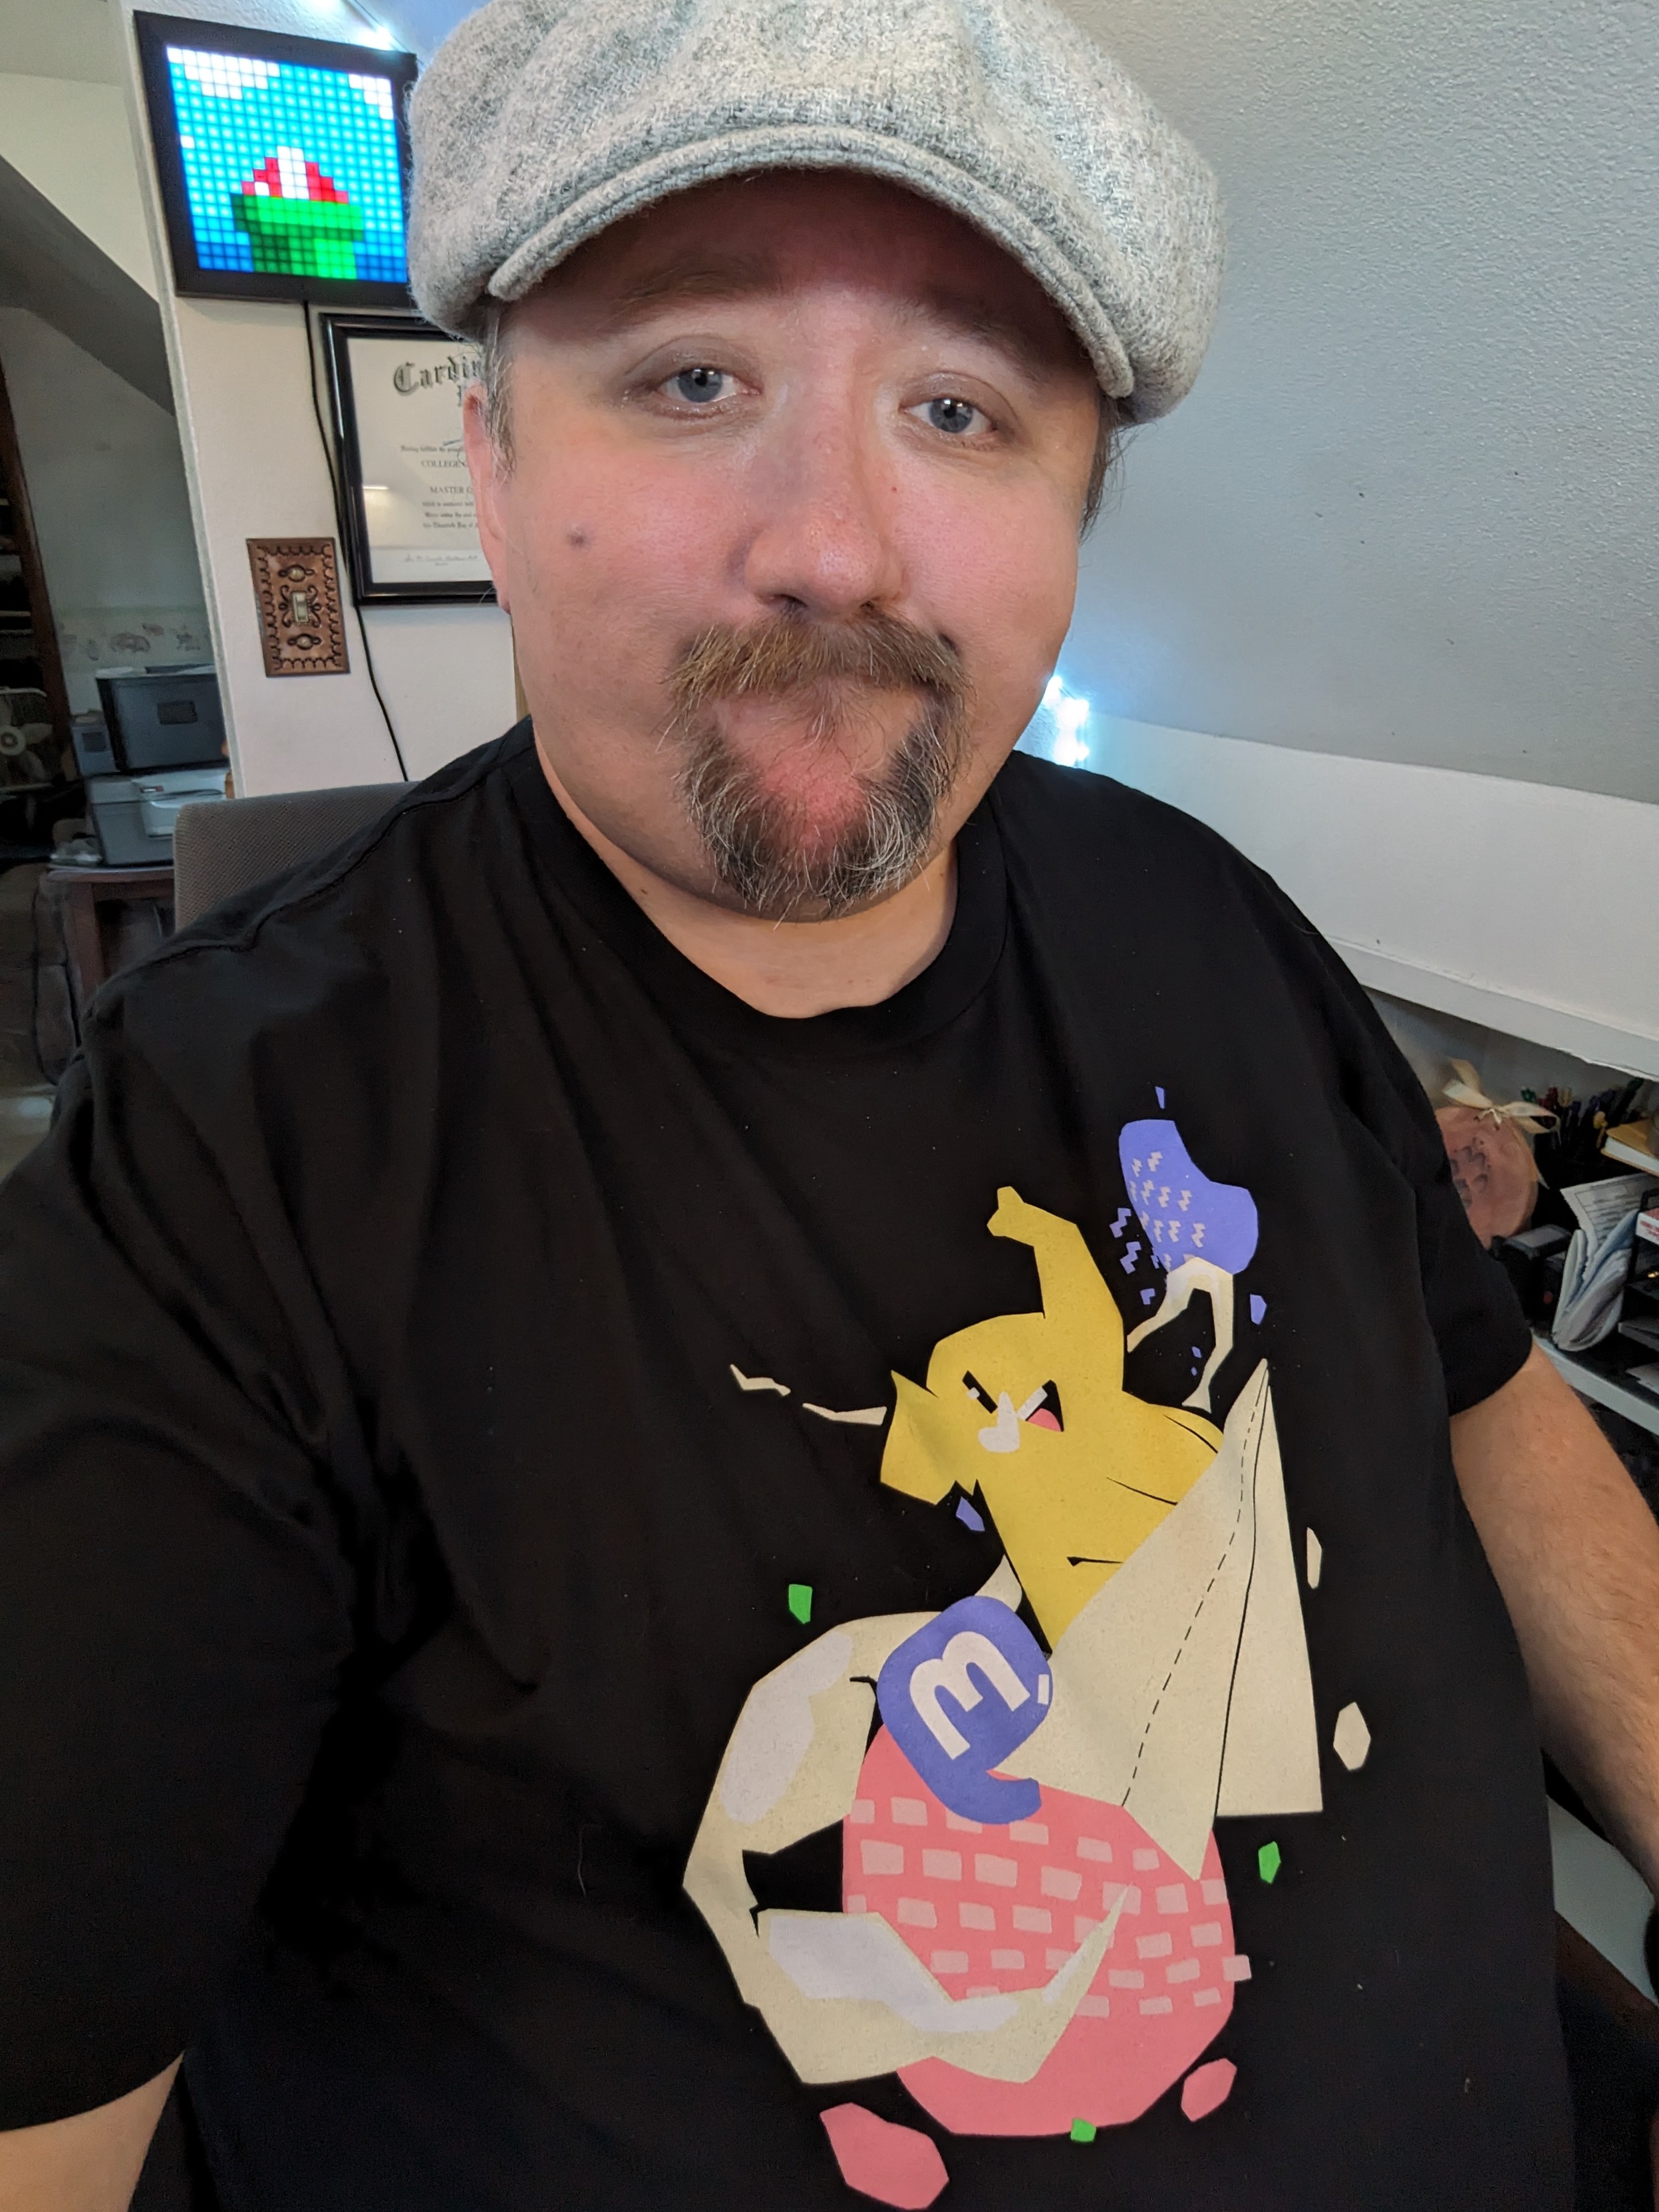 A goofy looking white dude wearing a flat cap and a black mastodon t-shirt.